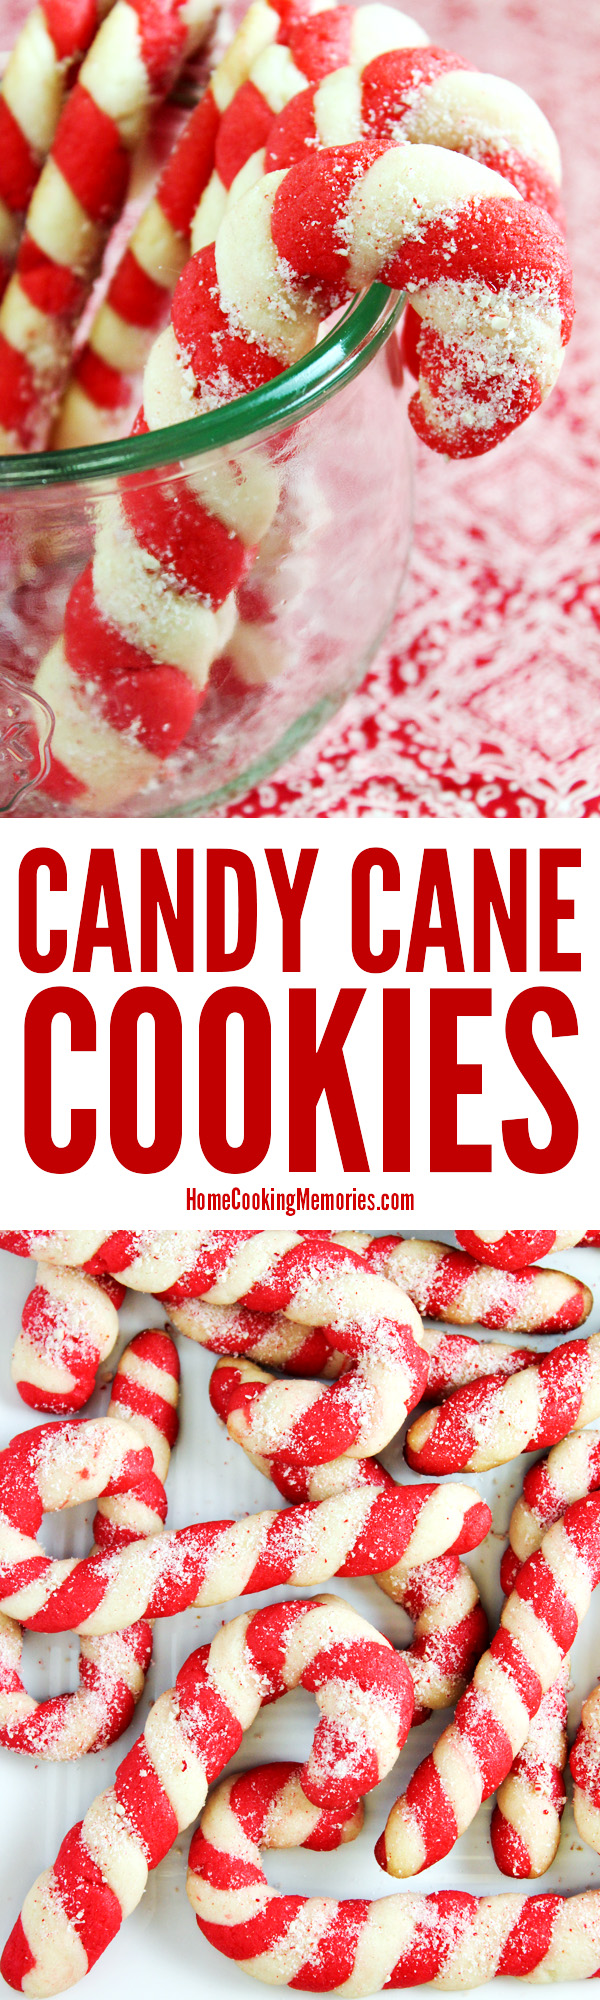 Christmas Candy Cane Cookies Recipe - Home Cooking Memories